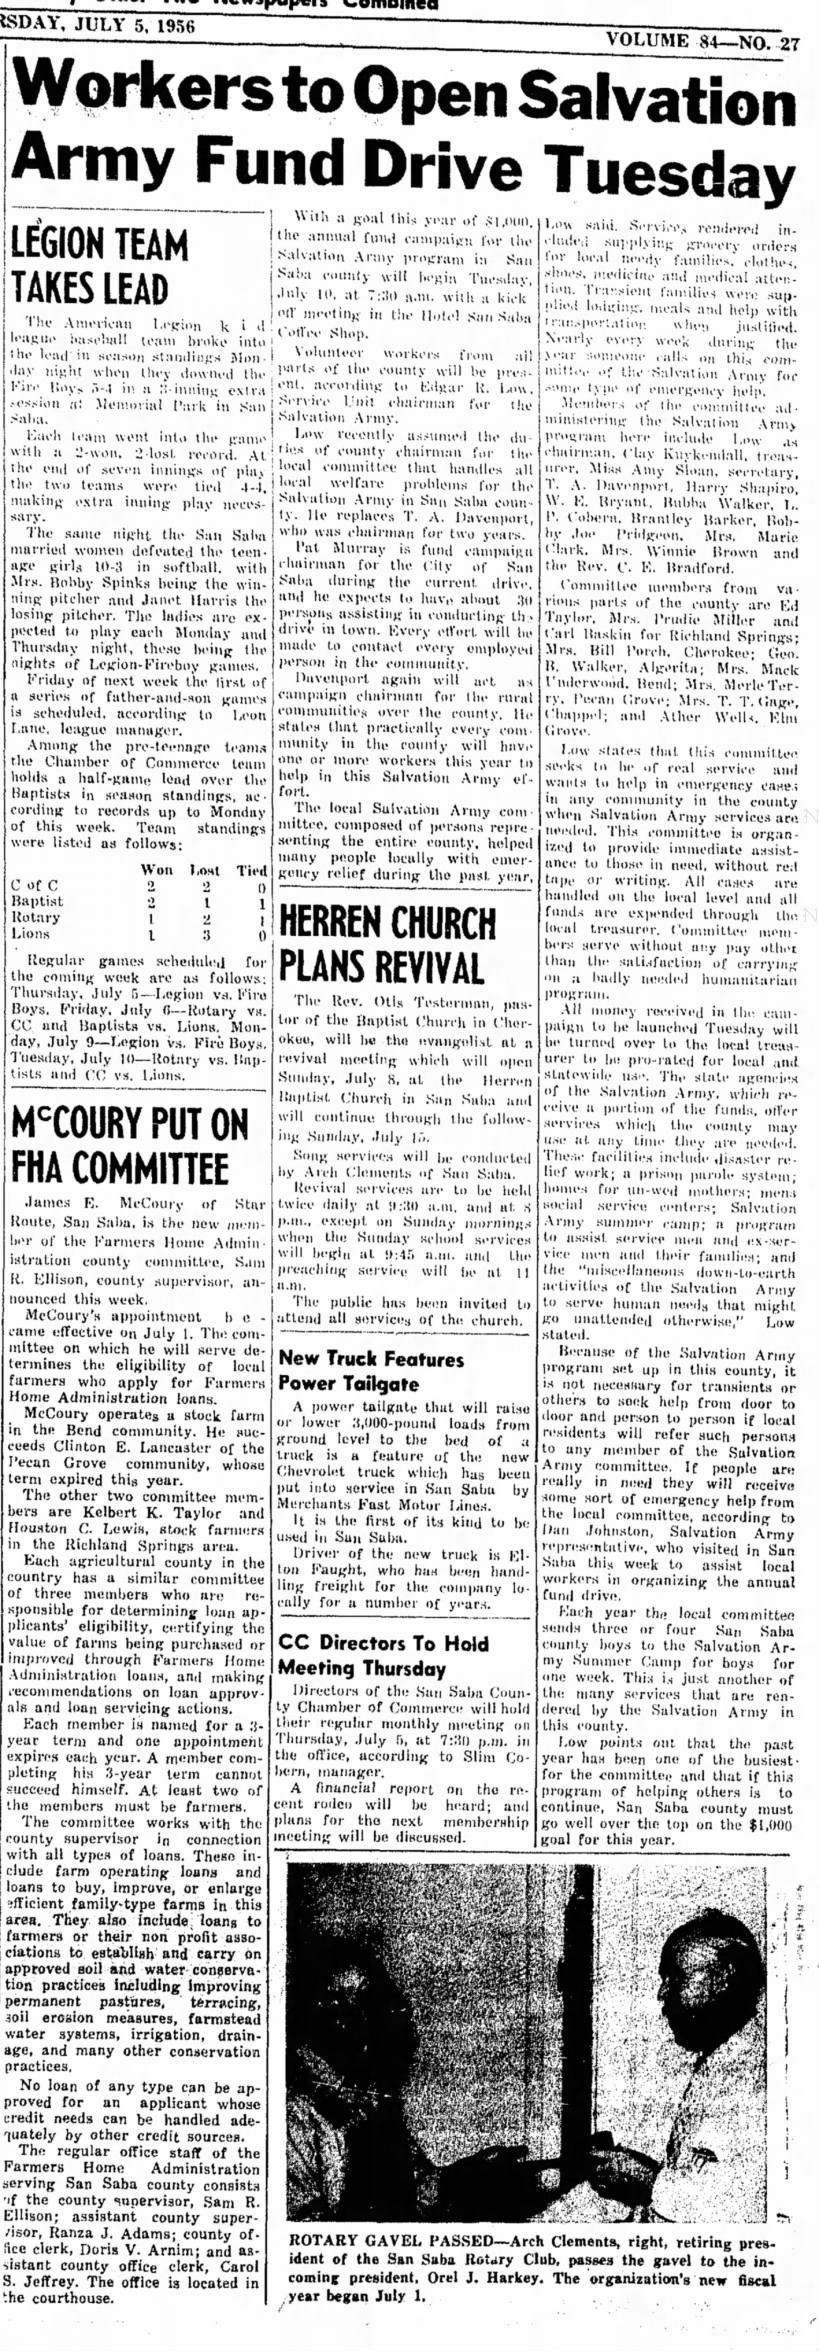 The San Saba News and Star 5 Jul 1956 Workers to opend Salvation Army Fund Drive Tuesday